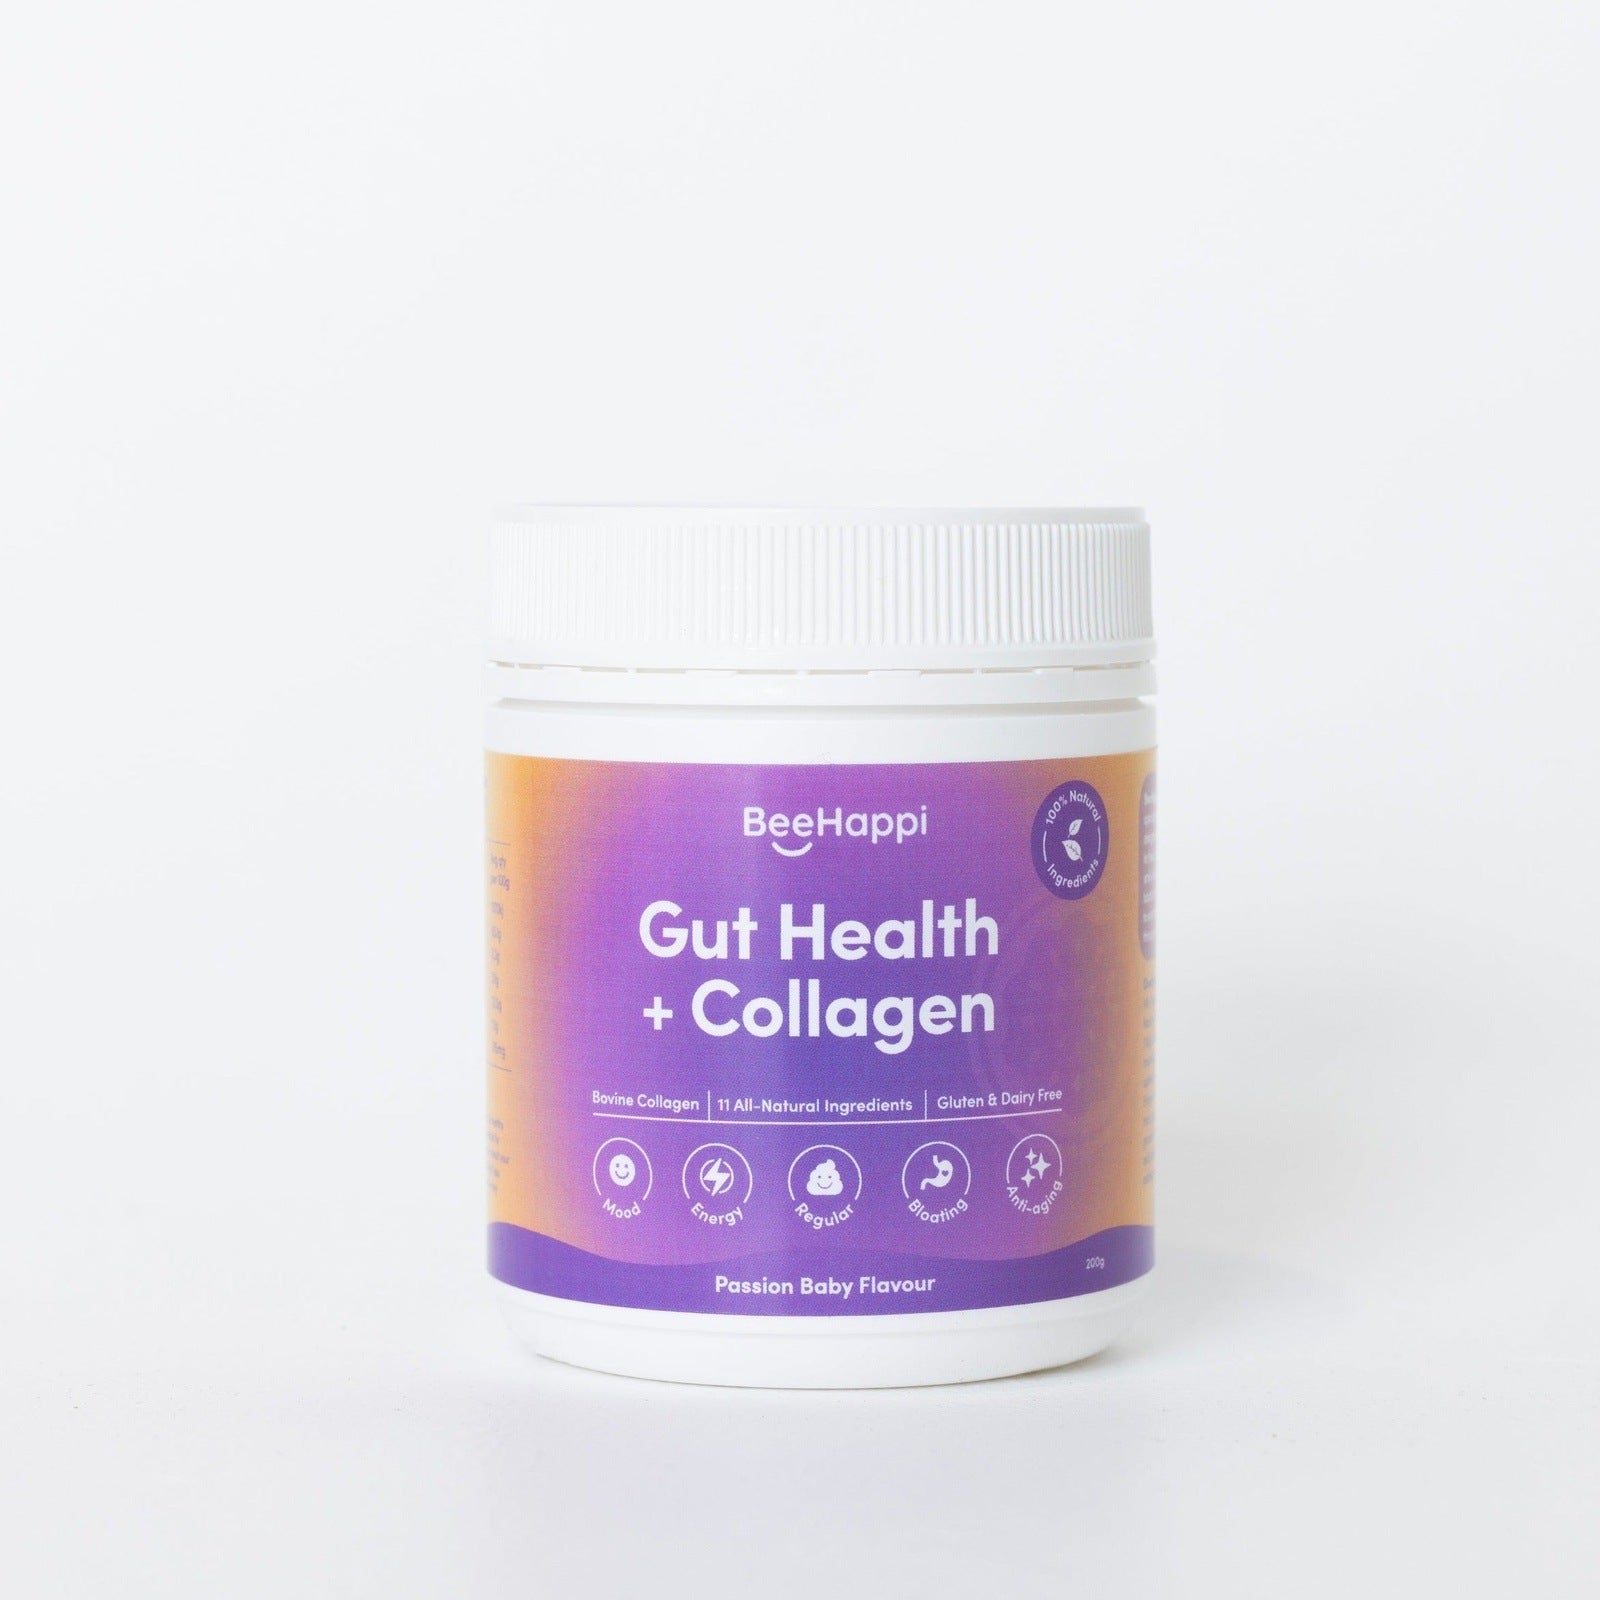 BeeHappi Passion Baby Collagen Blend - 190g